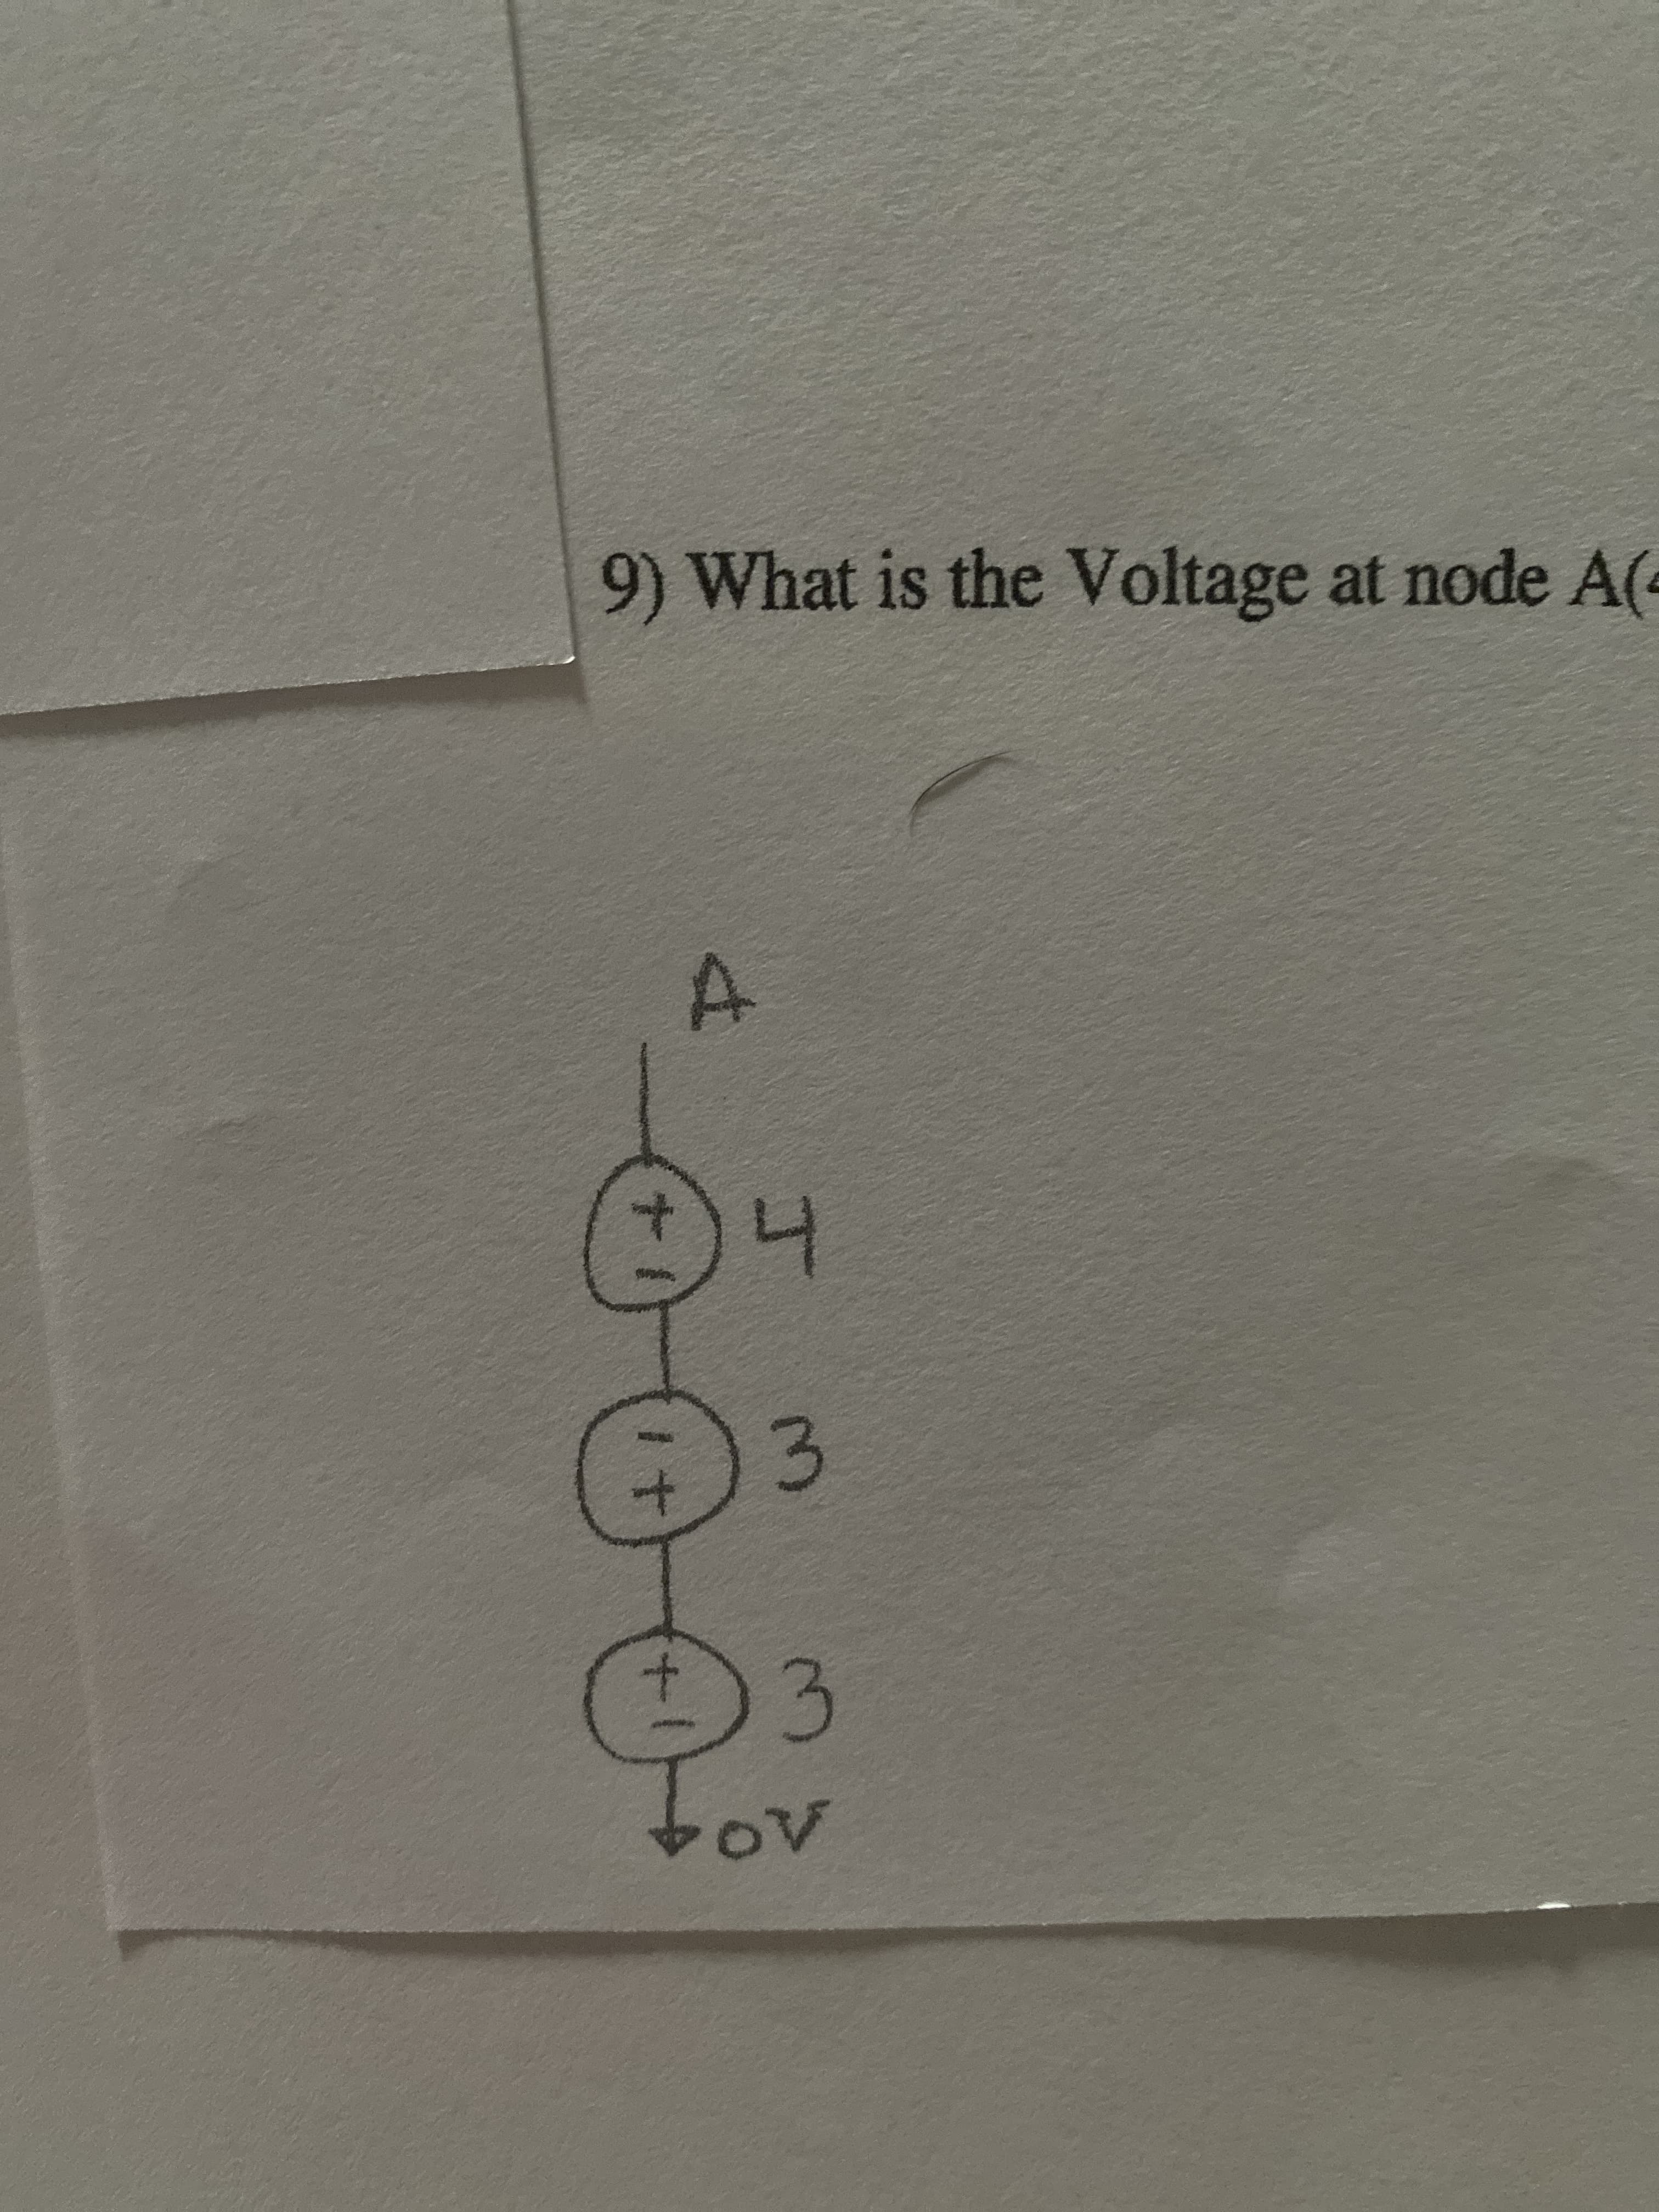 +.
3.
to
3.
9) What is the Voltage at node A(-
